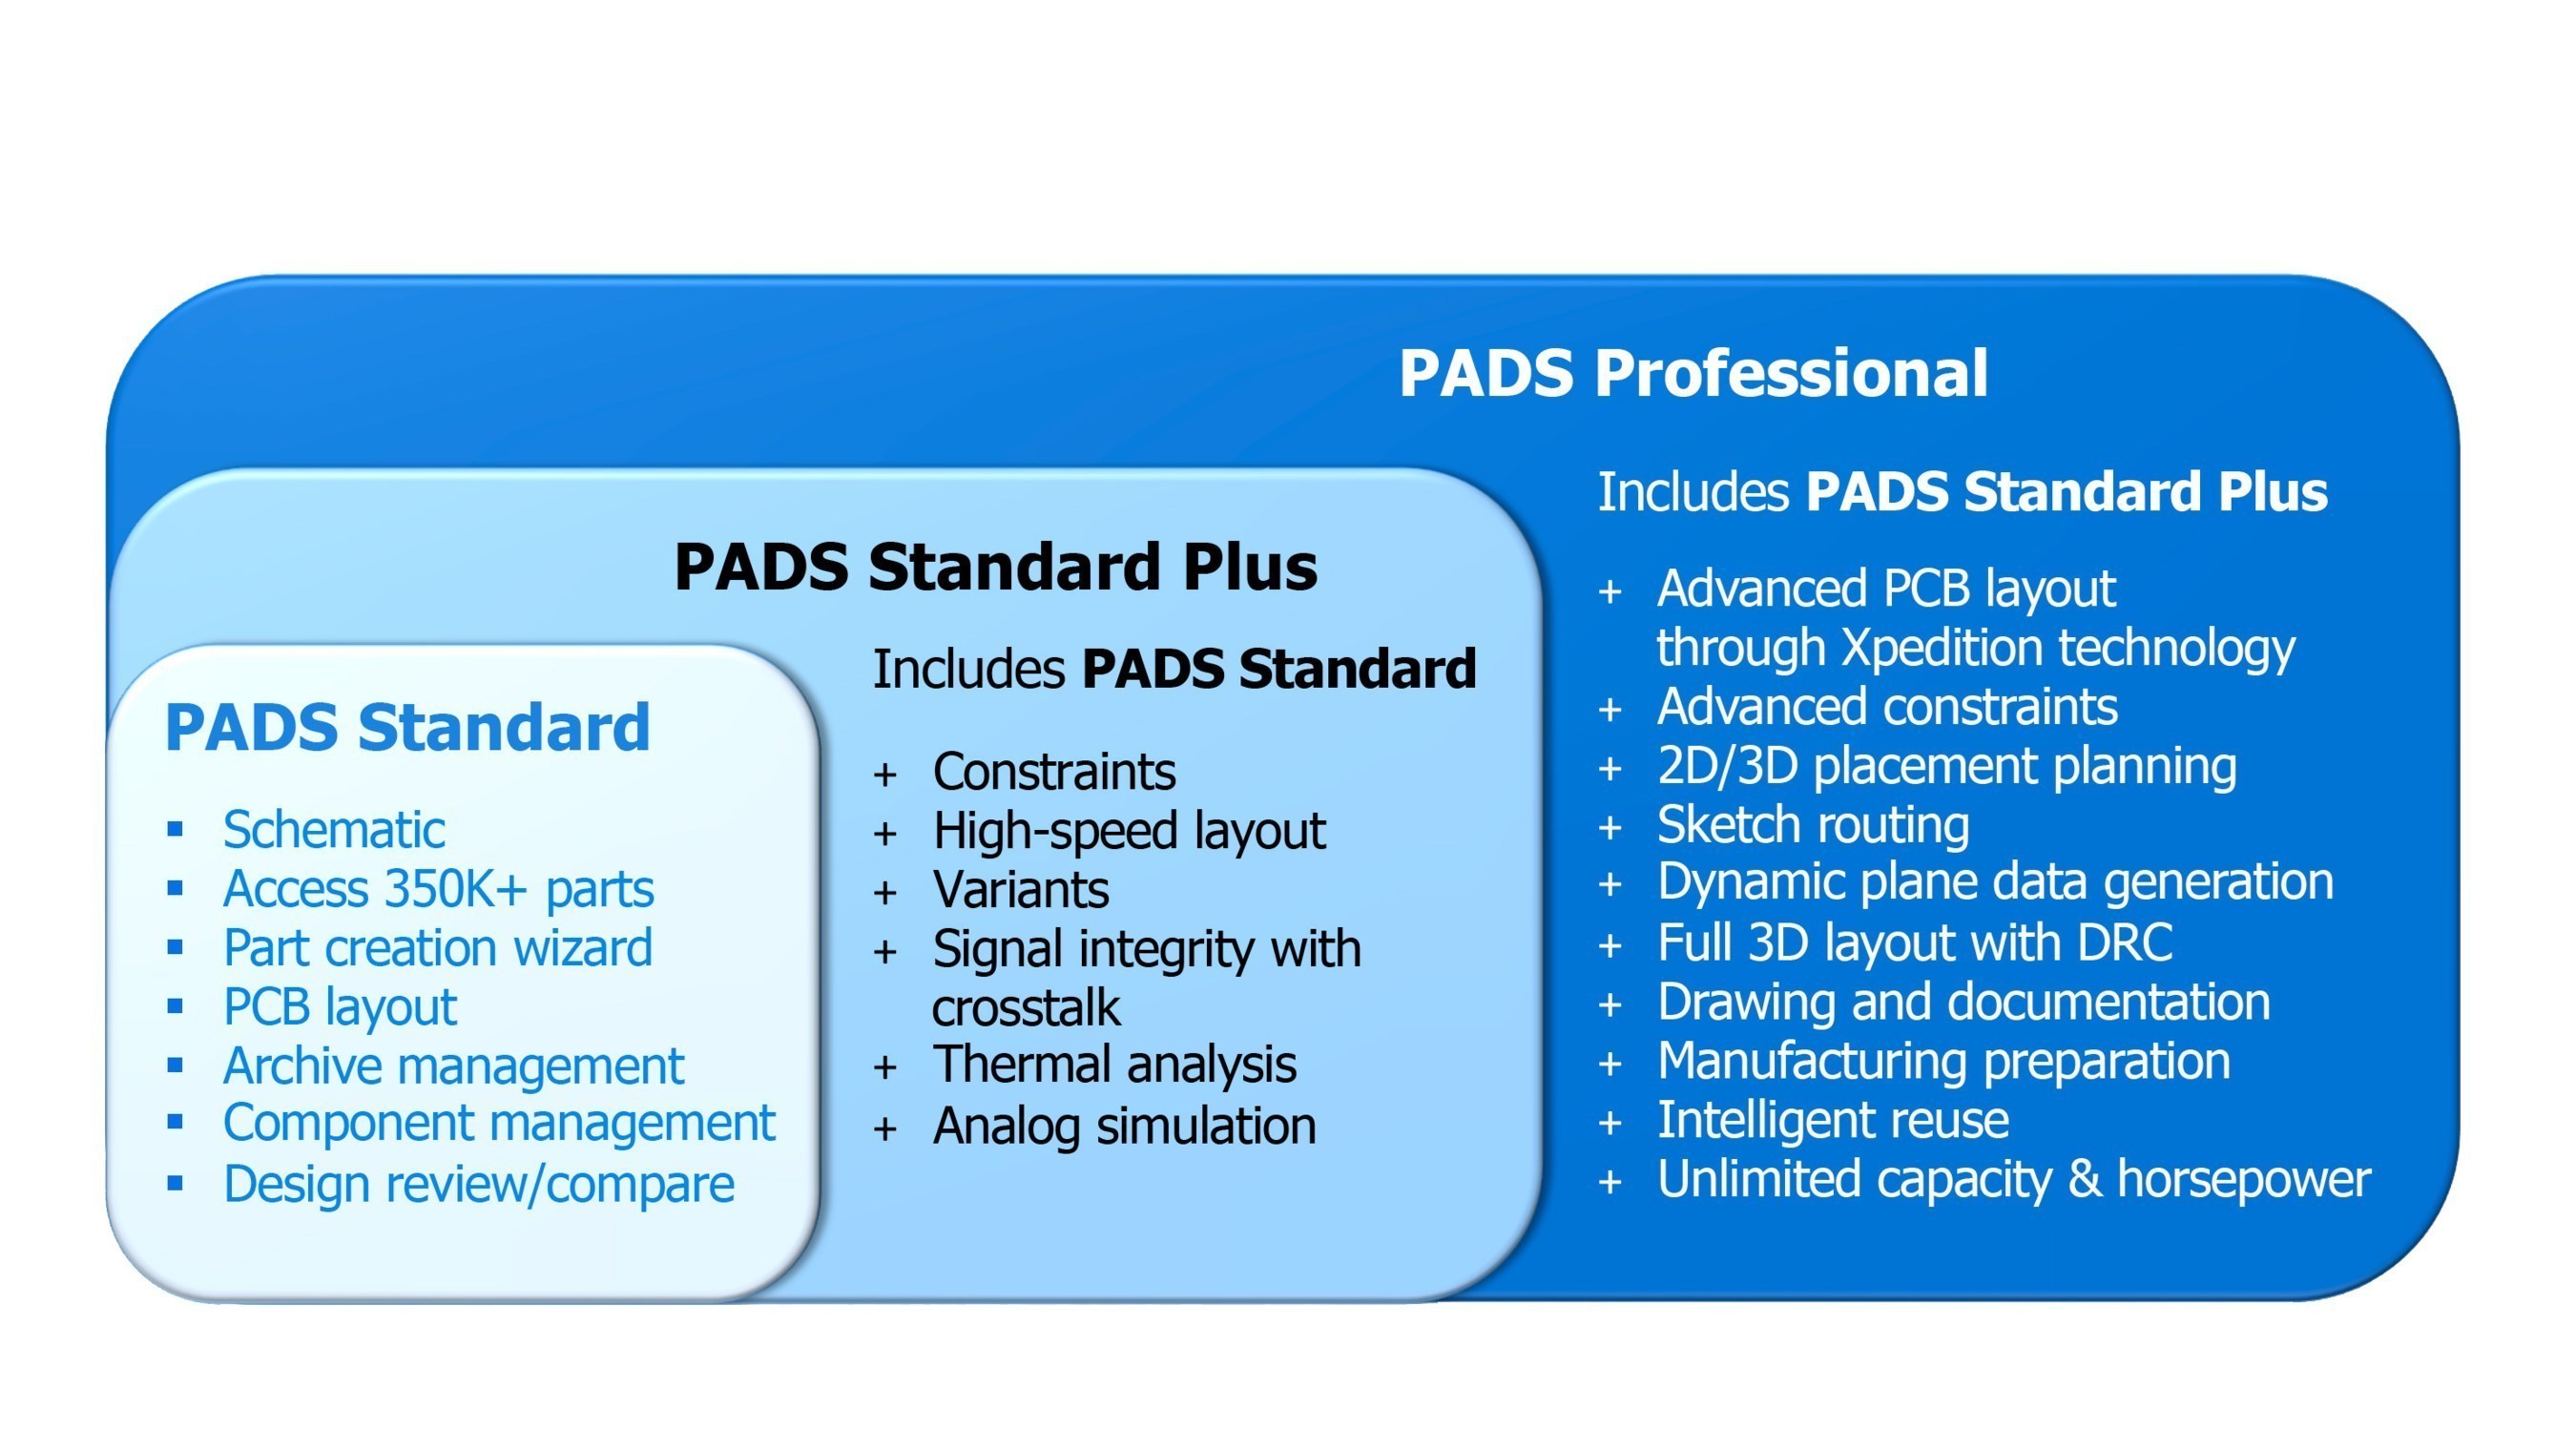 Mentor Graphics' new family of PADS products for PCB systems design address the advancing needs of today's independent engineer. The PADS products provide unbeatable price and performance, for projects from concept though simulation and layout, and into manufacturing.